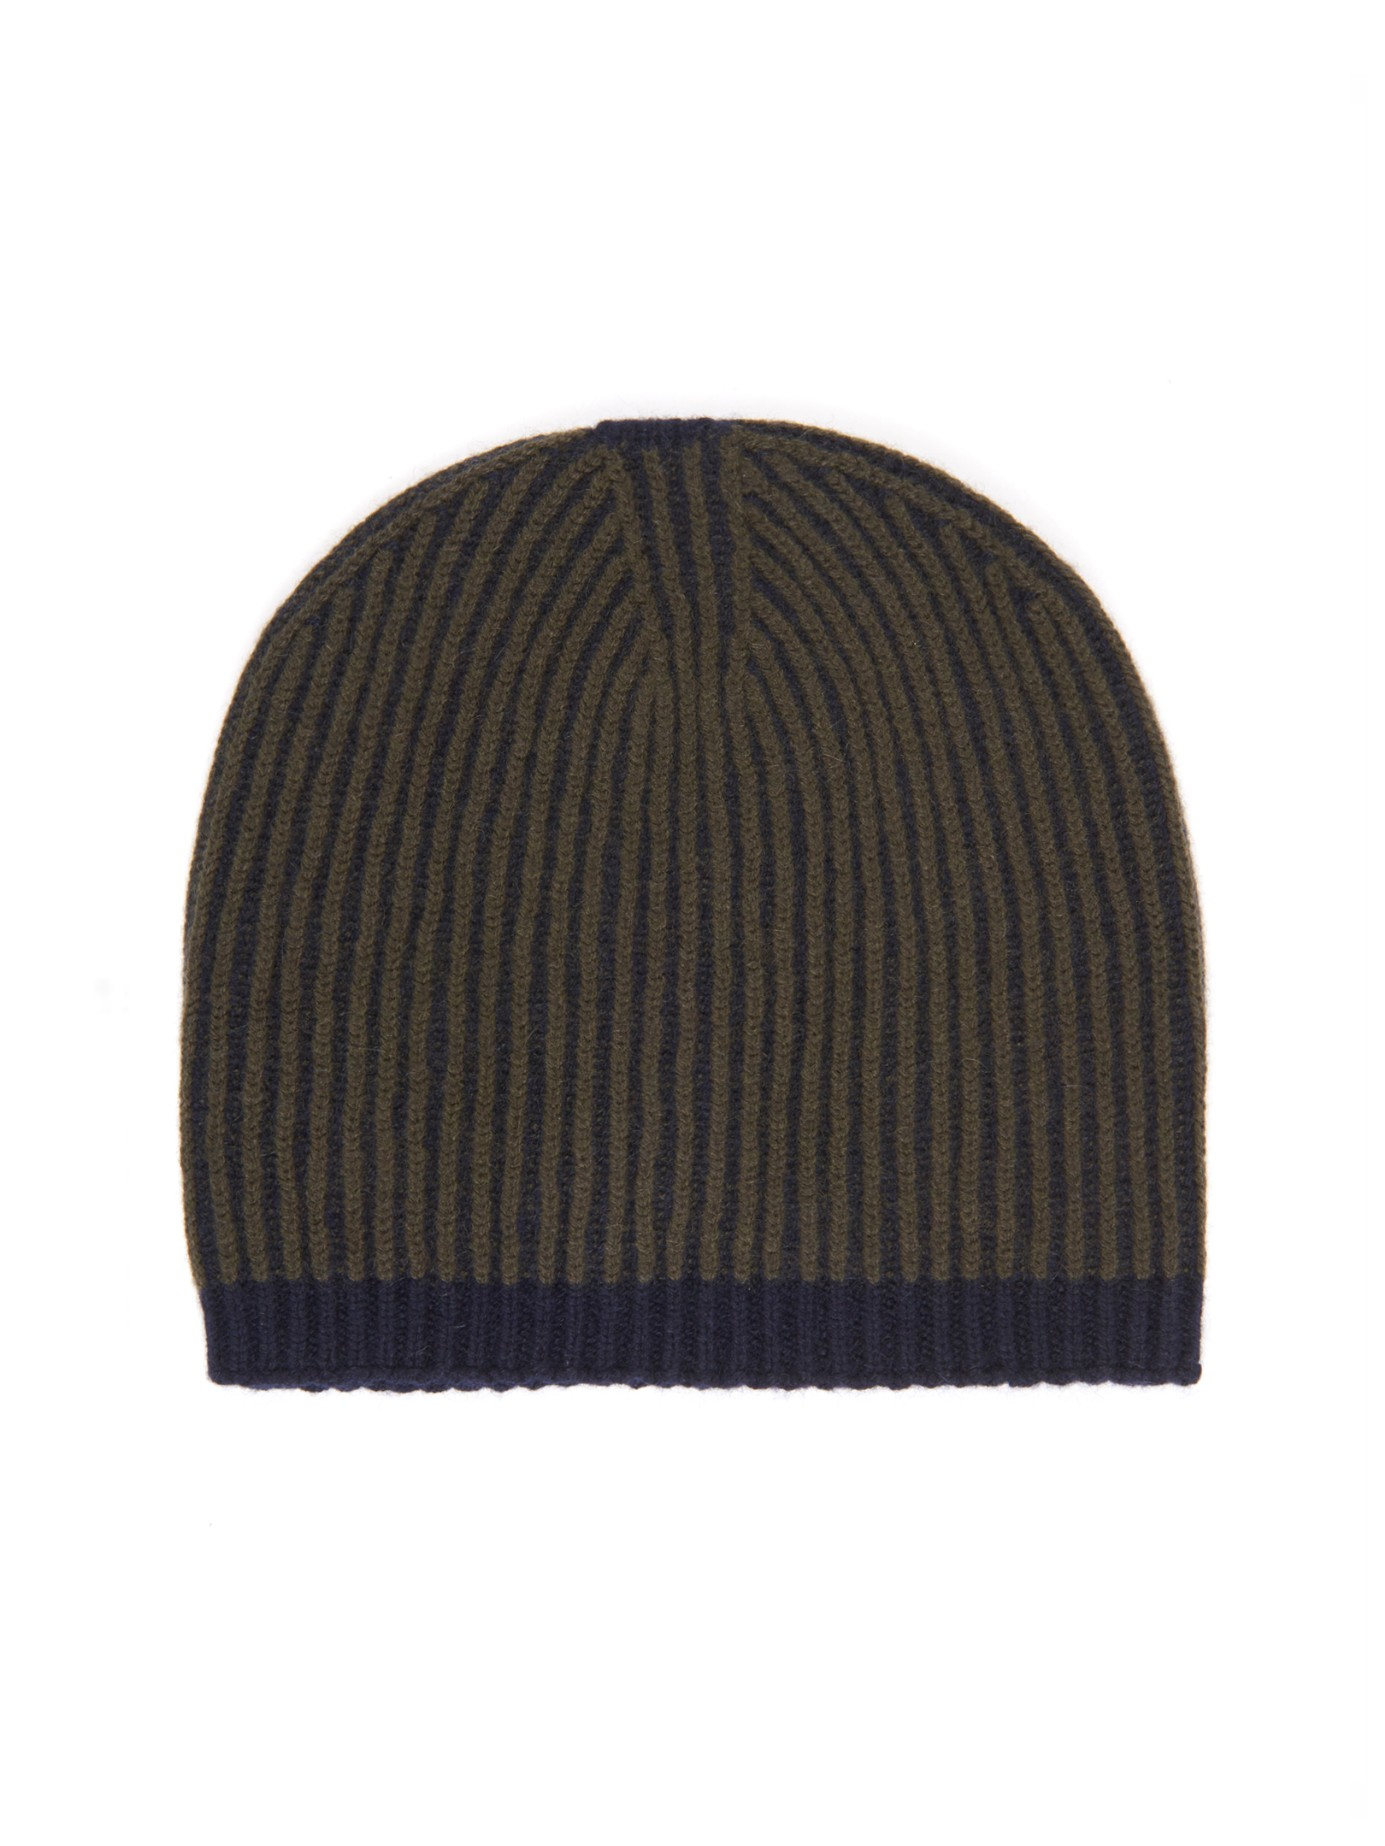 Gucci Ribbed-Knit Cashmere Beanie Hat in Gray for Men | Lyst